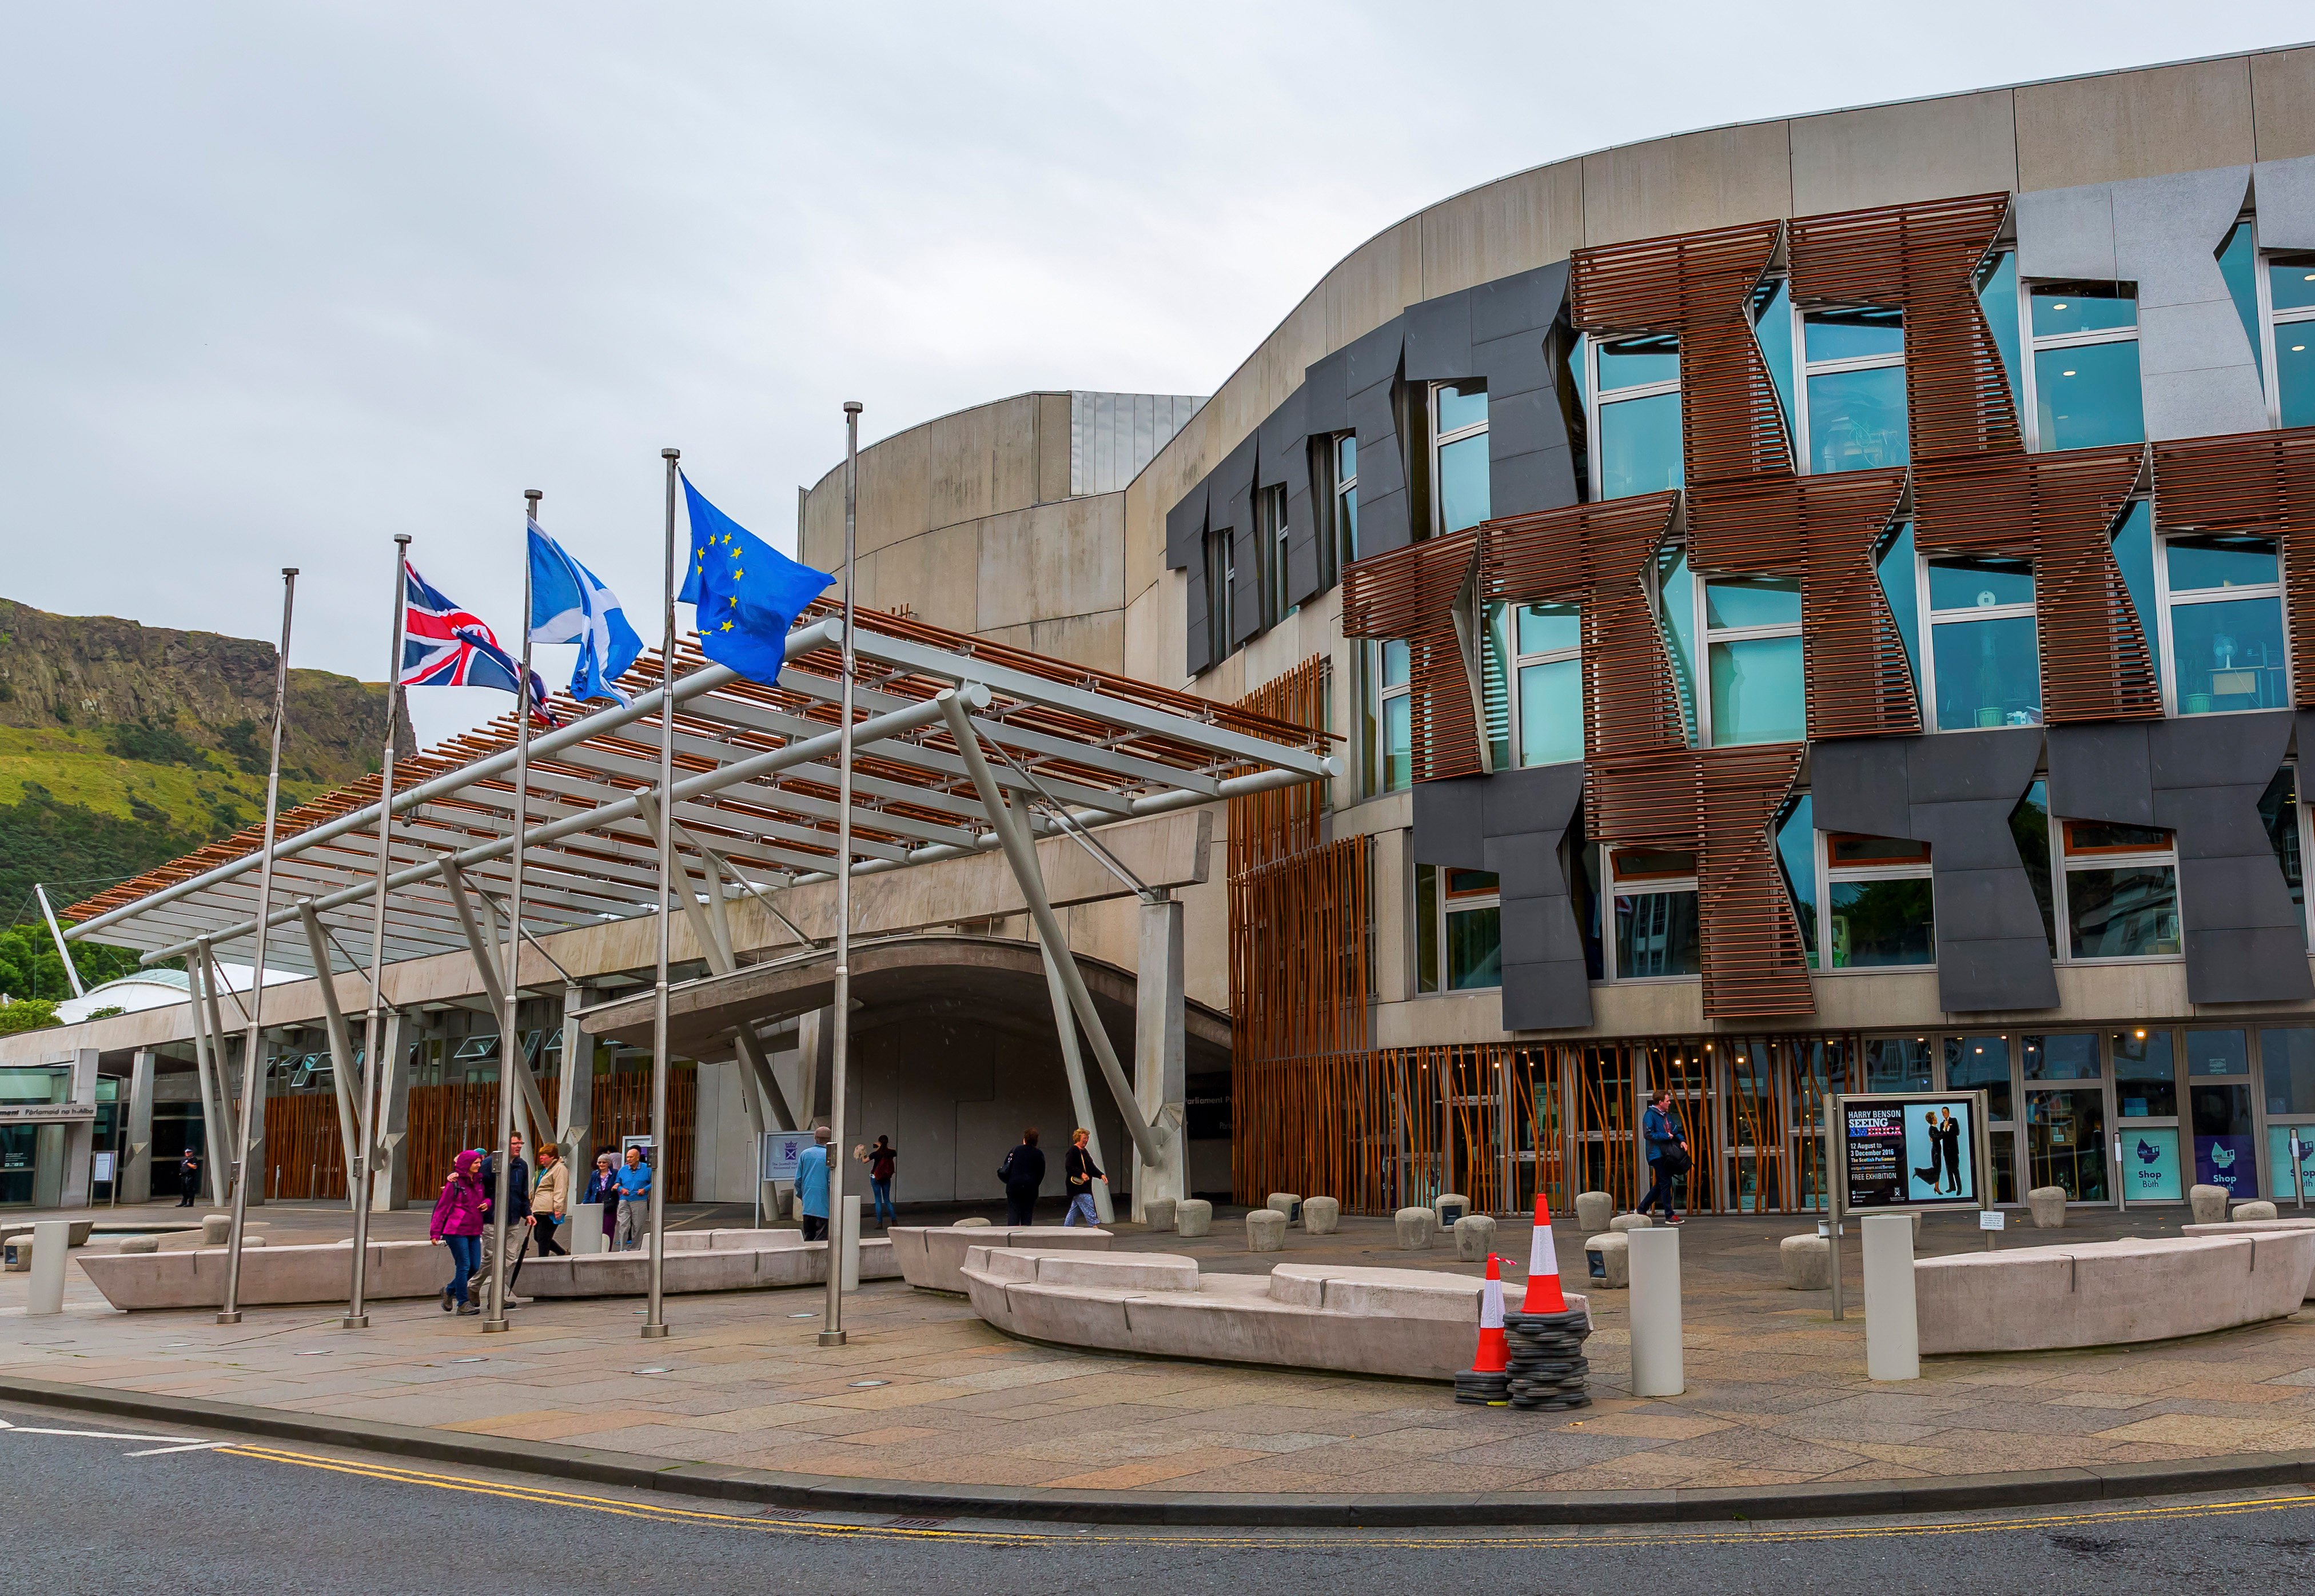 Building of Scottish parliament. Members of the Scottish Parliament passed the Hate Crime and Public Order (Scotland) Act in 2021, consolidating existing hate crime legislation and creating a new offence of stirring up hatred against protected characteristics. Photos: Shutterstock